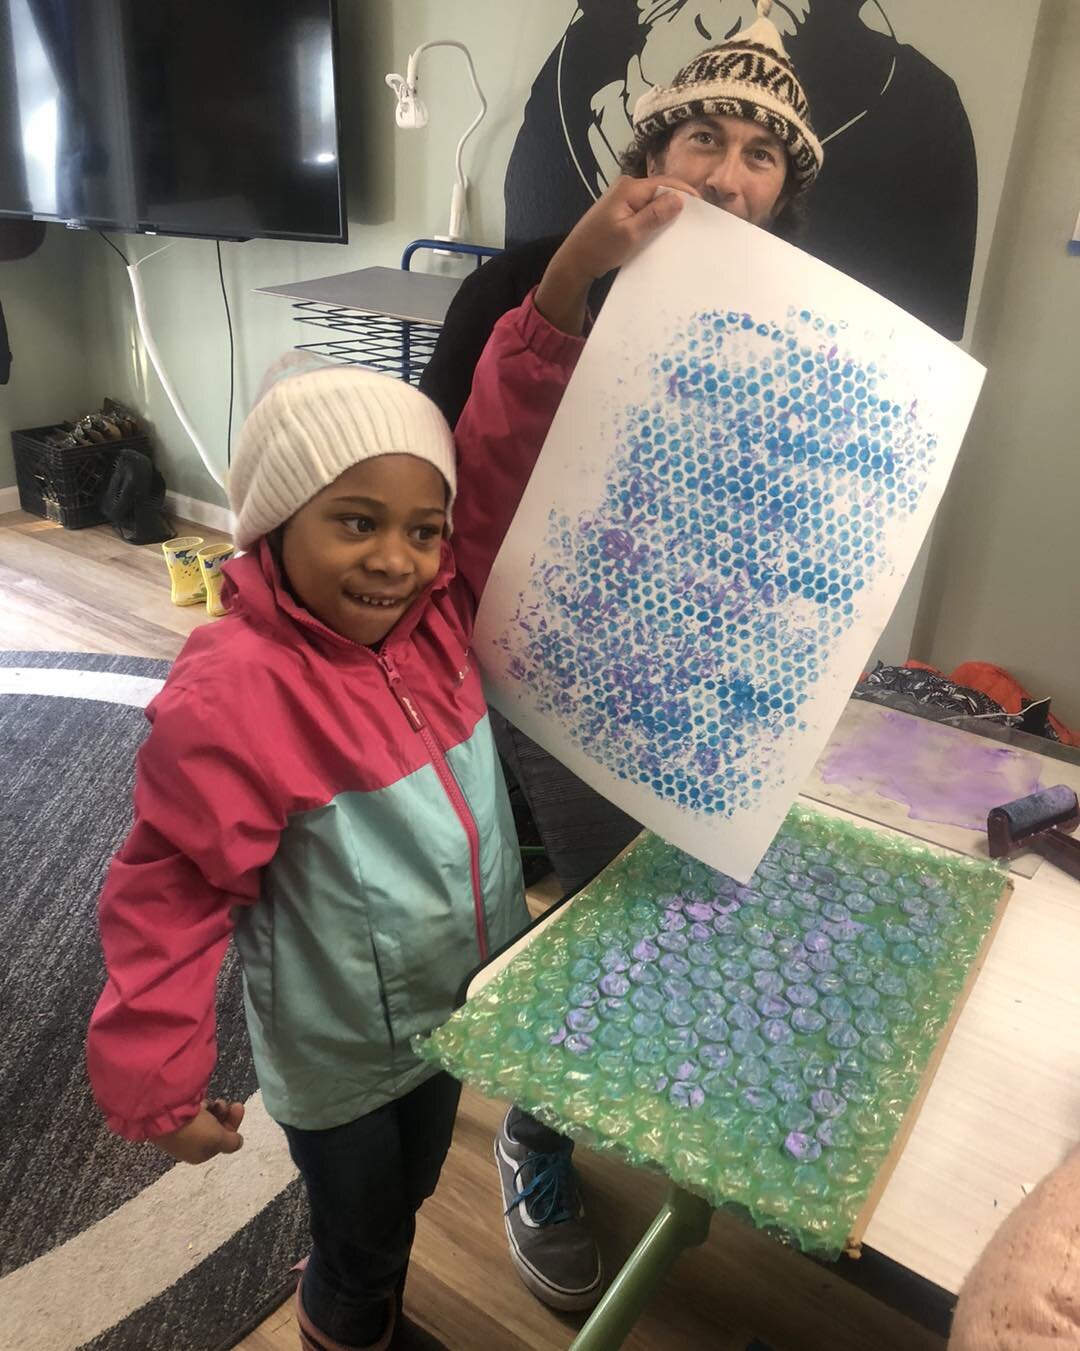 Did you know you can make prints with bubble wrap? The kindergartners do! And it makes a great background for the beautiful fish they made in art class!